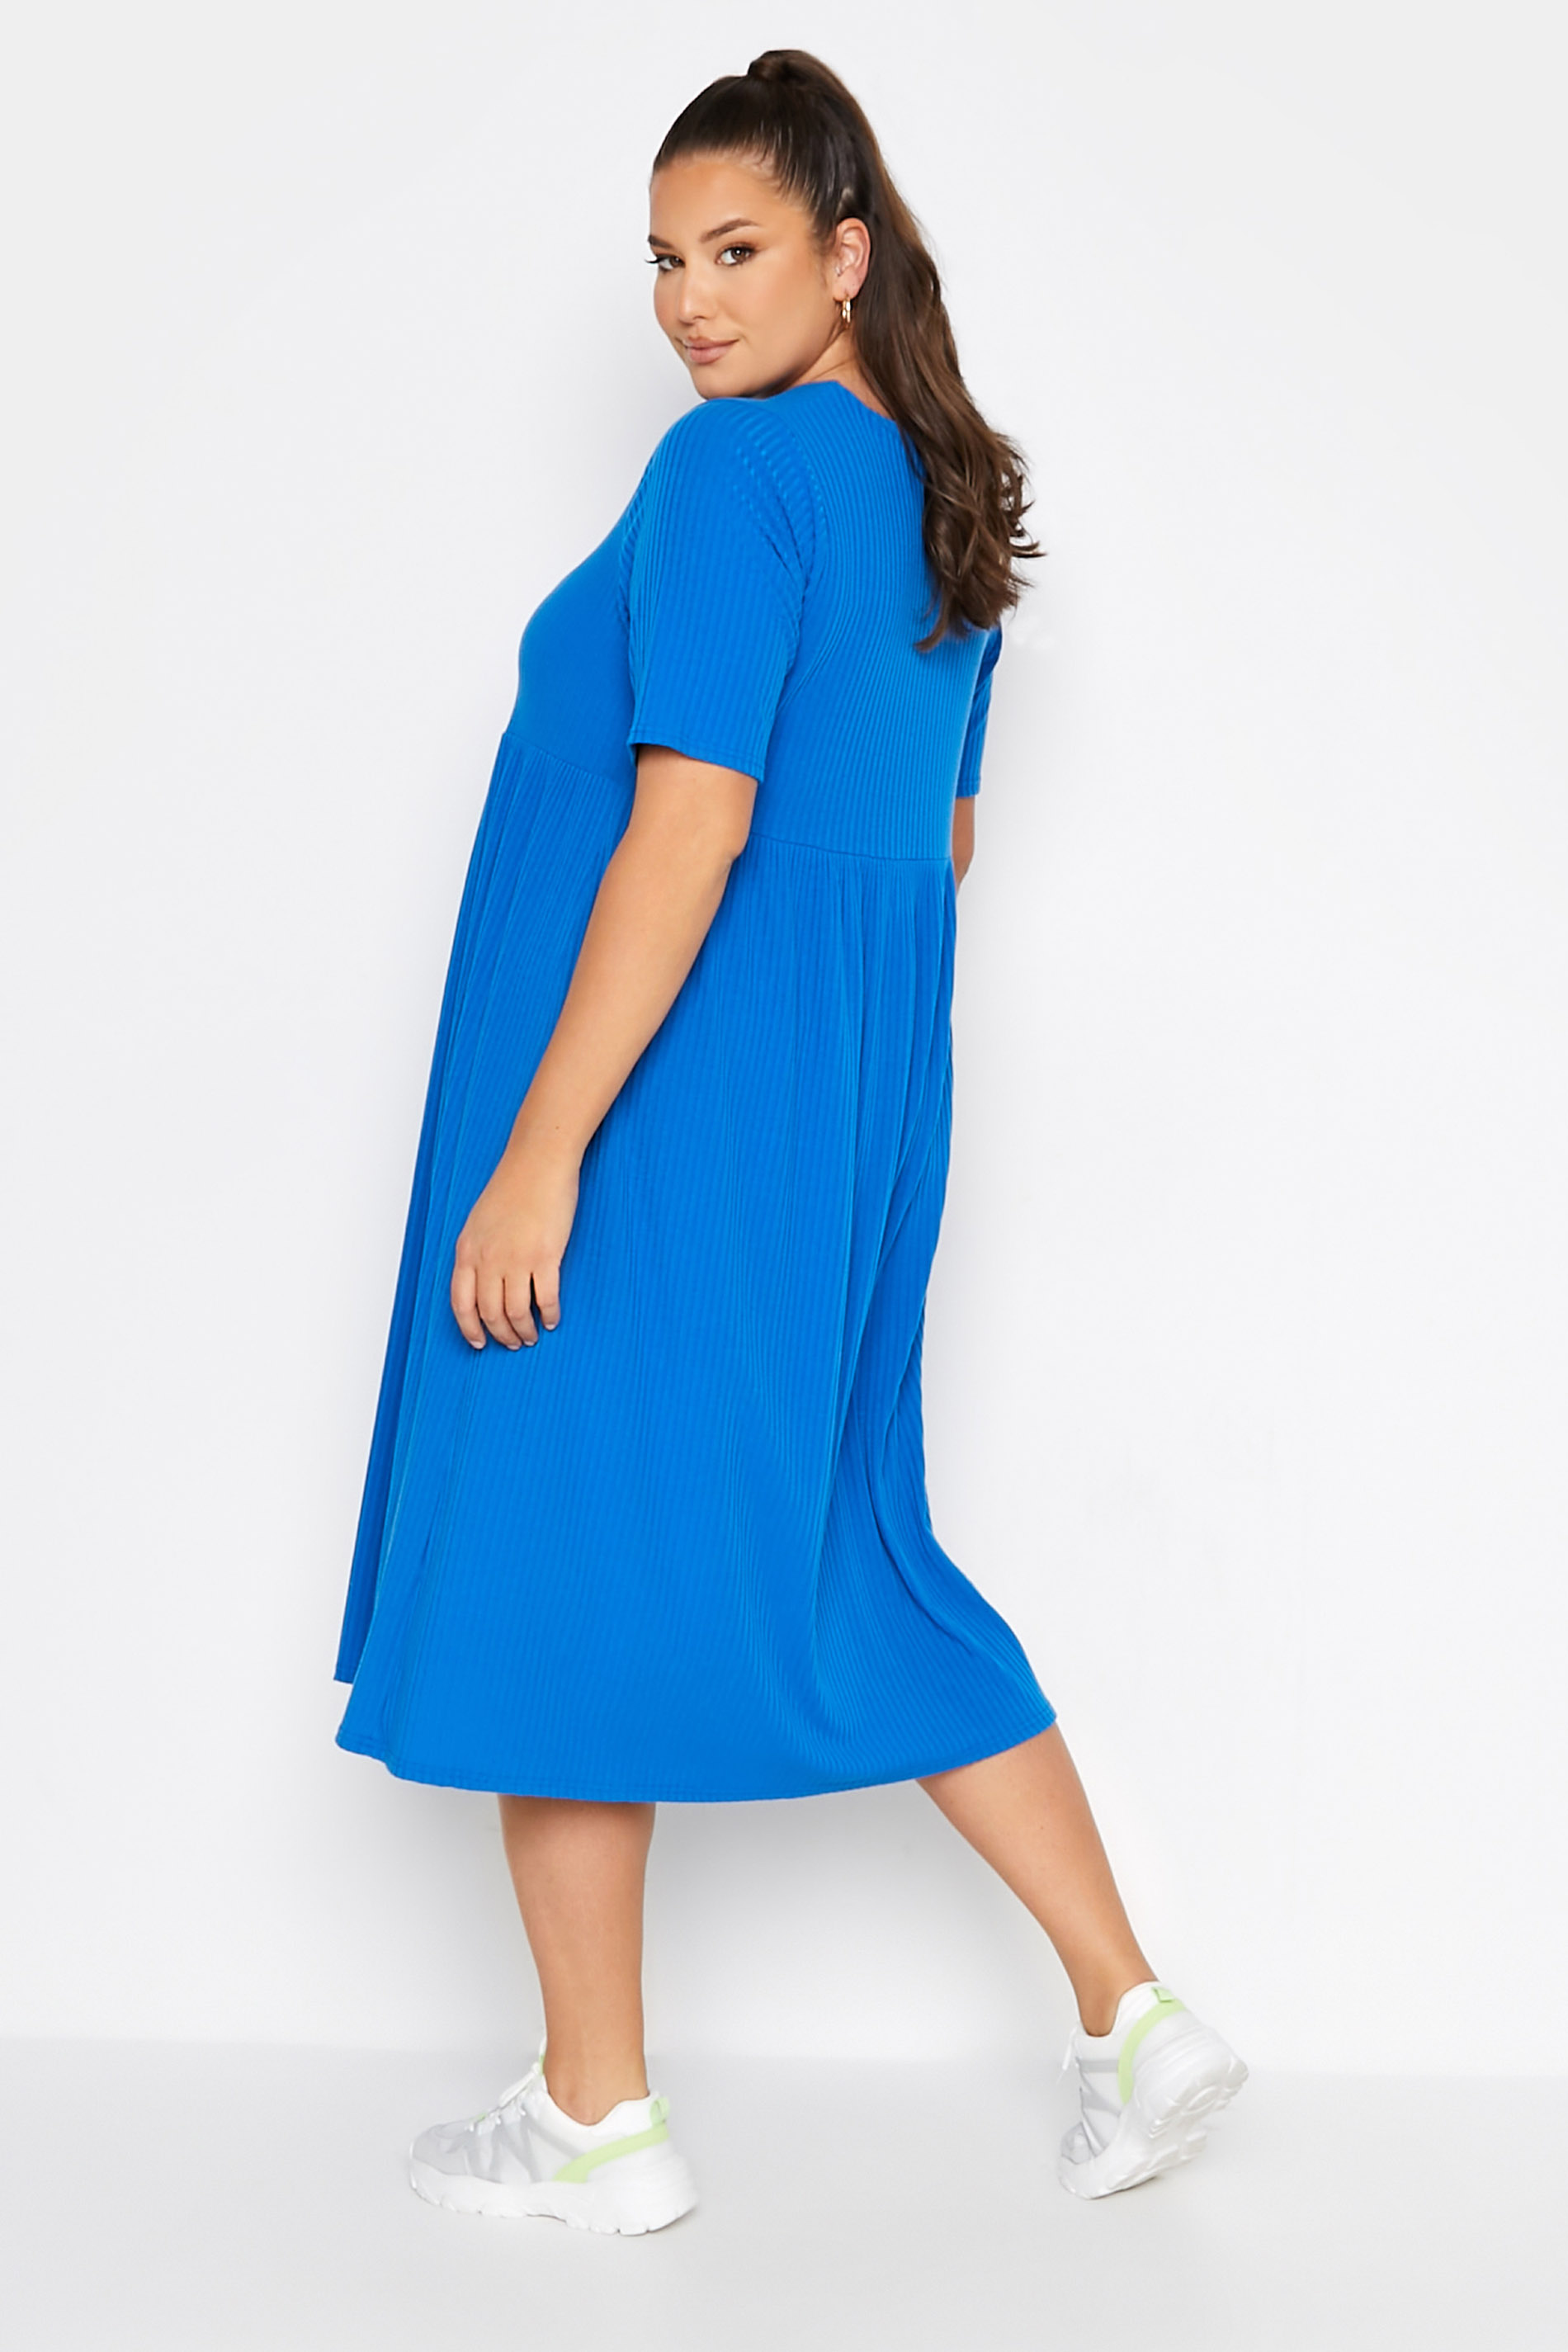 LIMITED COLLECTION Plus Size Cobalt Blue Ribbed Peplum Midi Dress | Yours Clothing  3